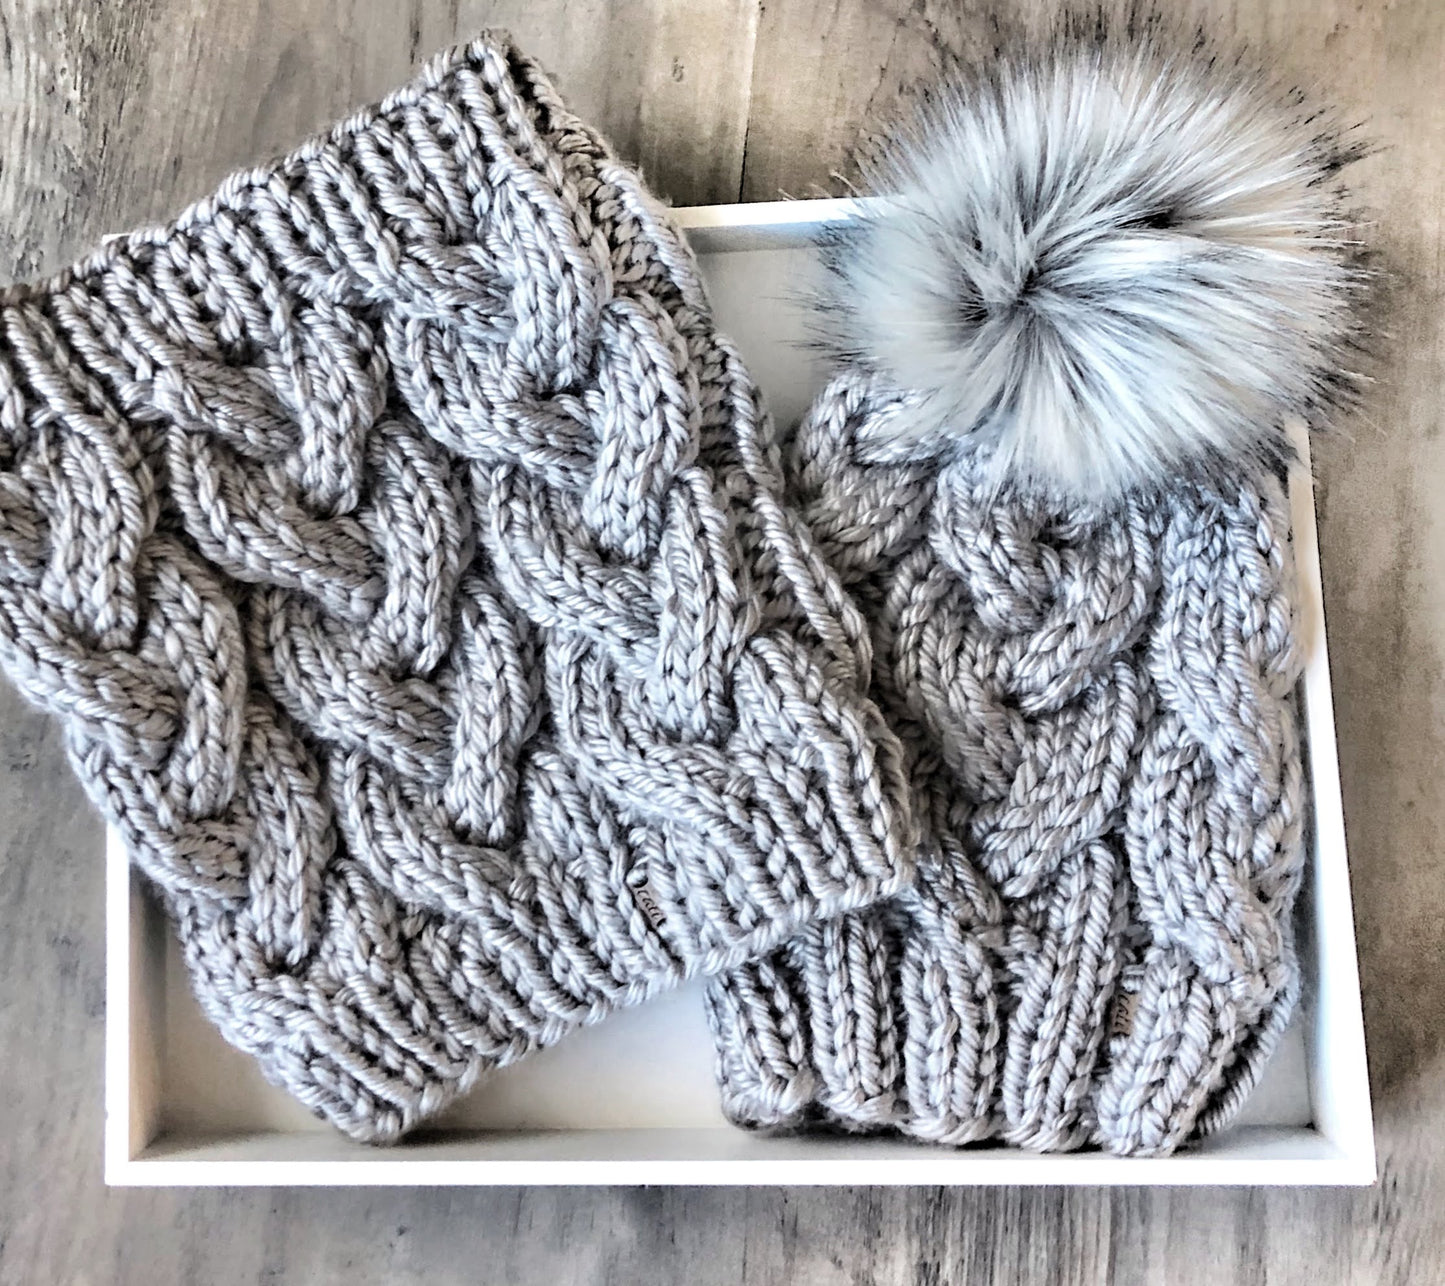 Monster Cables Neck Warmer / Cowl - Knitting Pattern